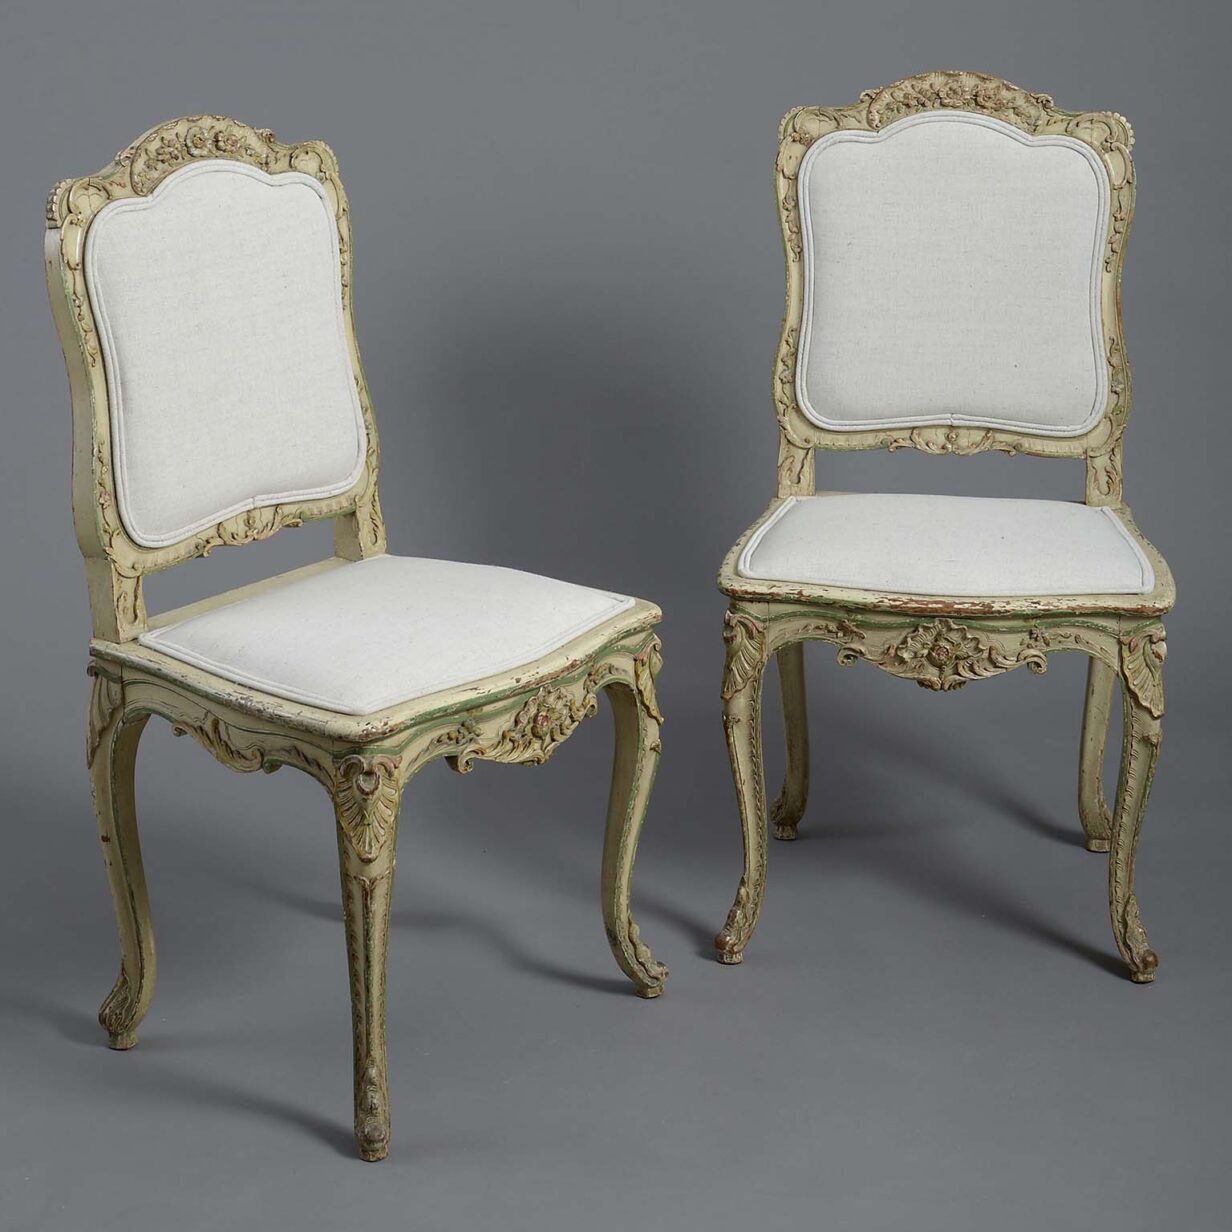 Pair of rococo side chairs